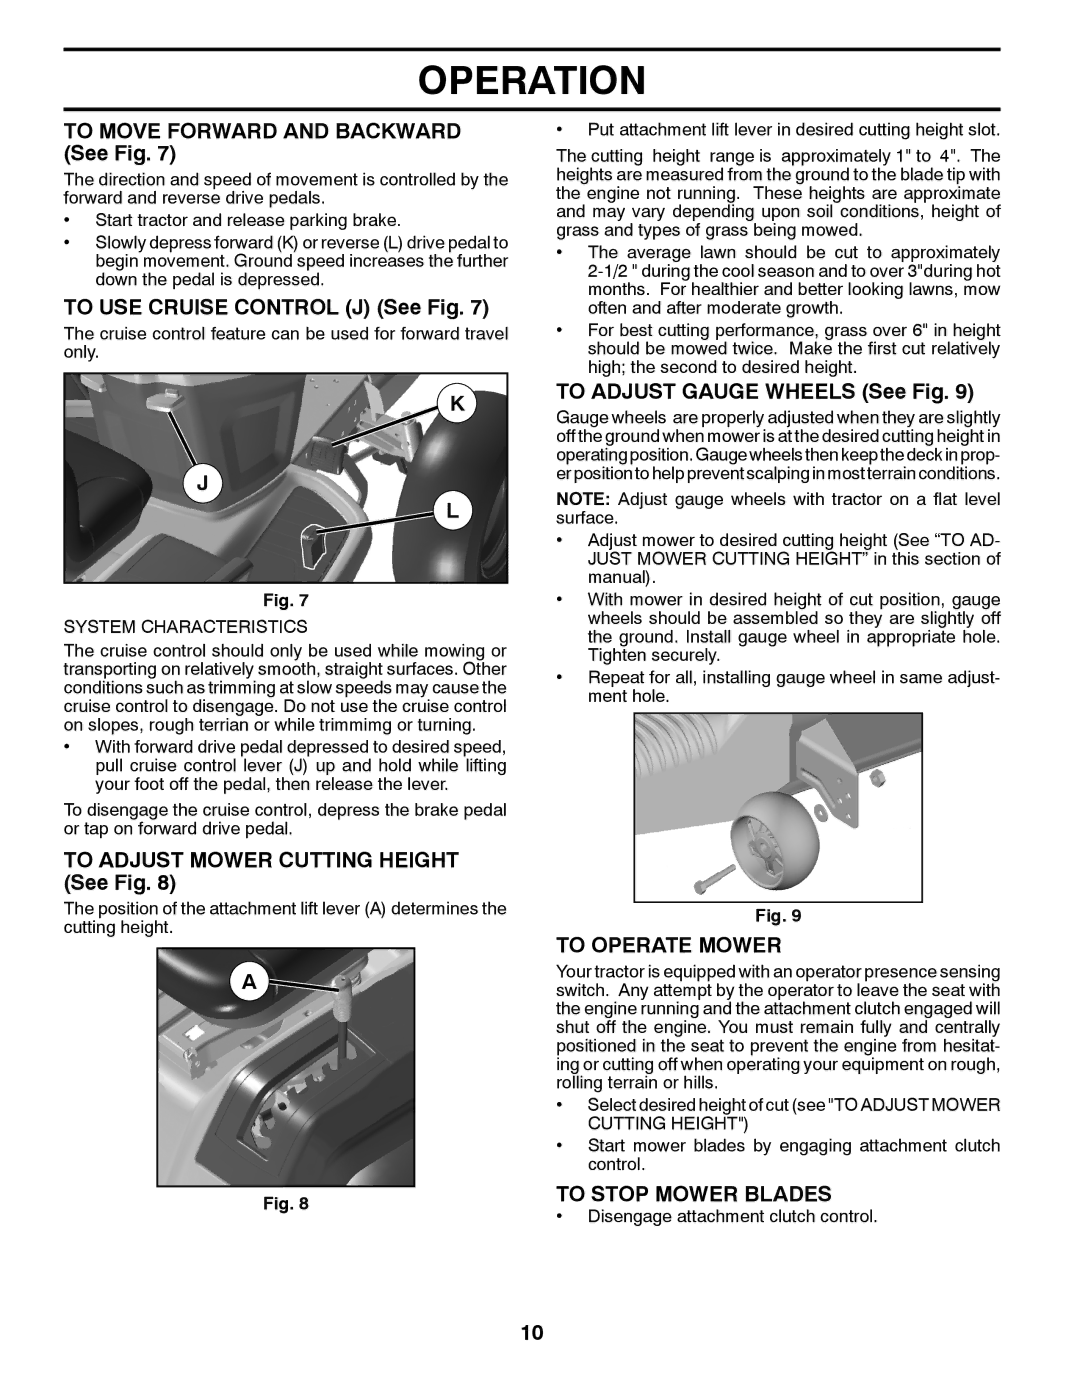 Husqvarna YTH23V48 owner manual To Operate Mower, To Stop Mower Blades 